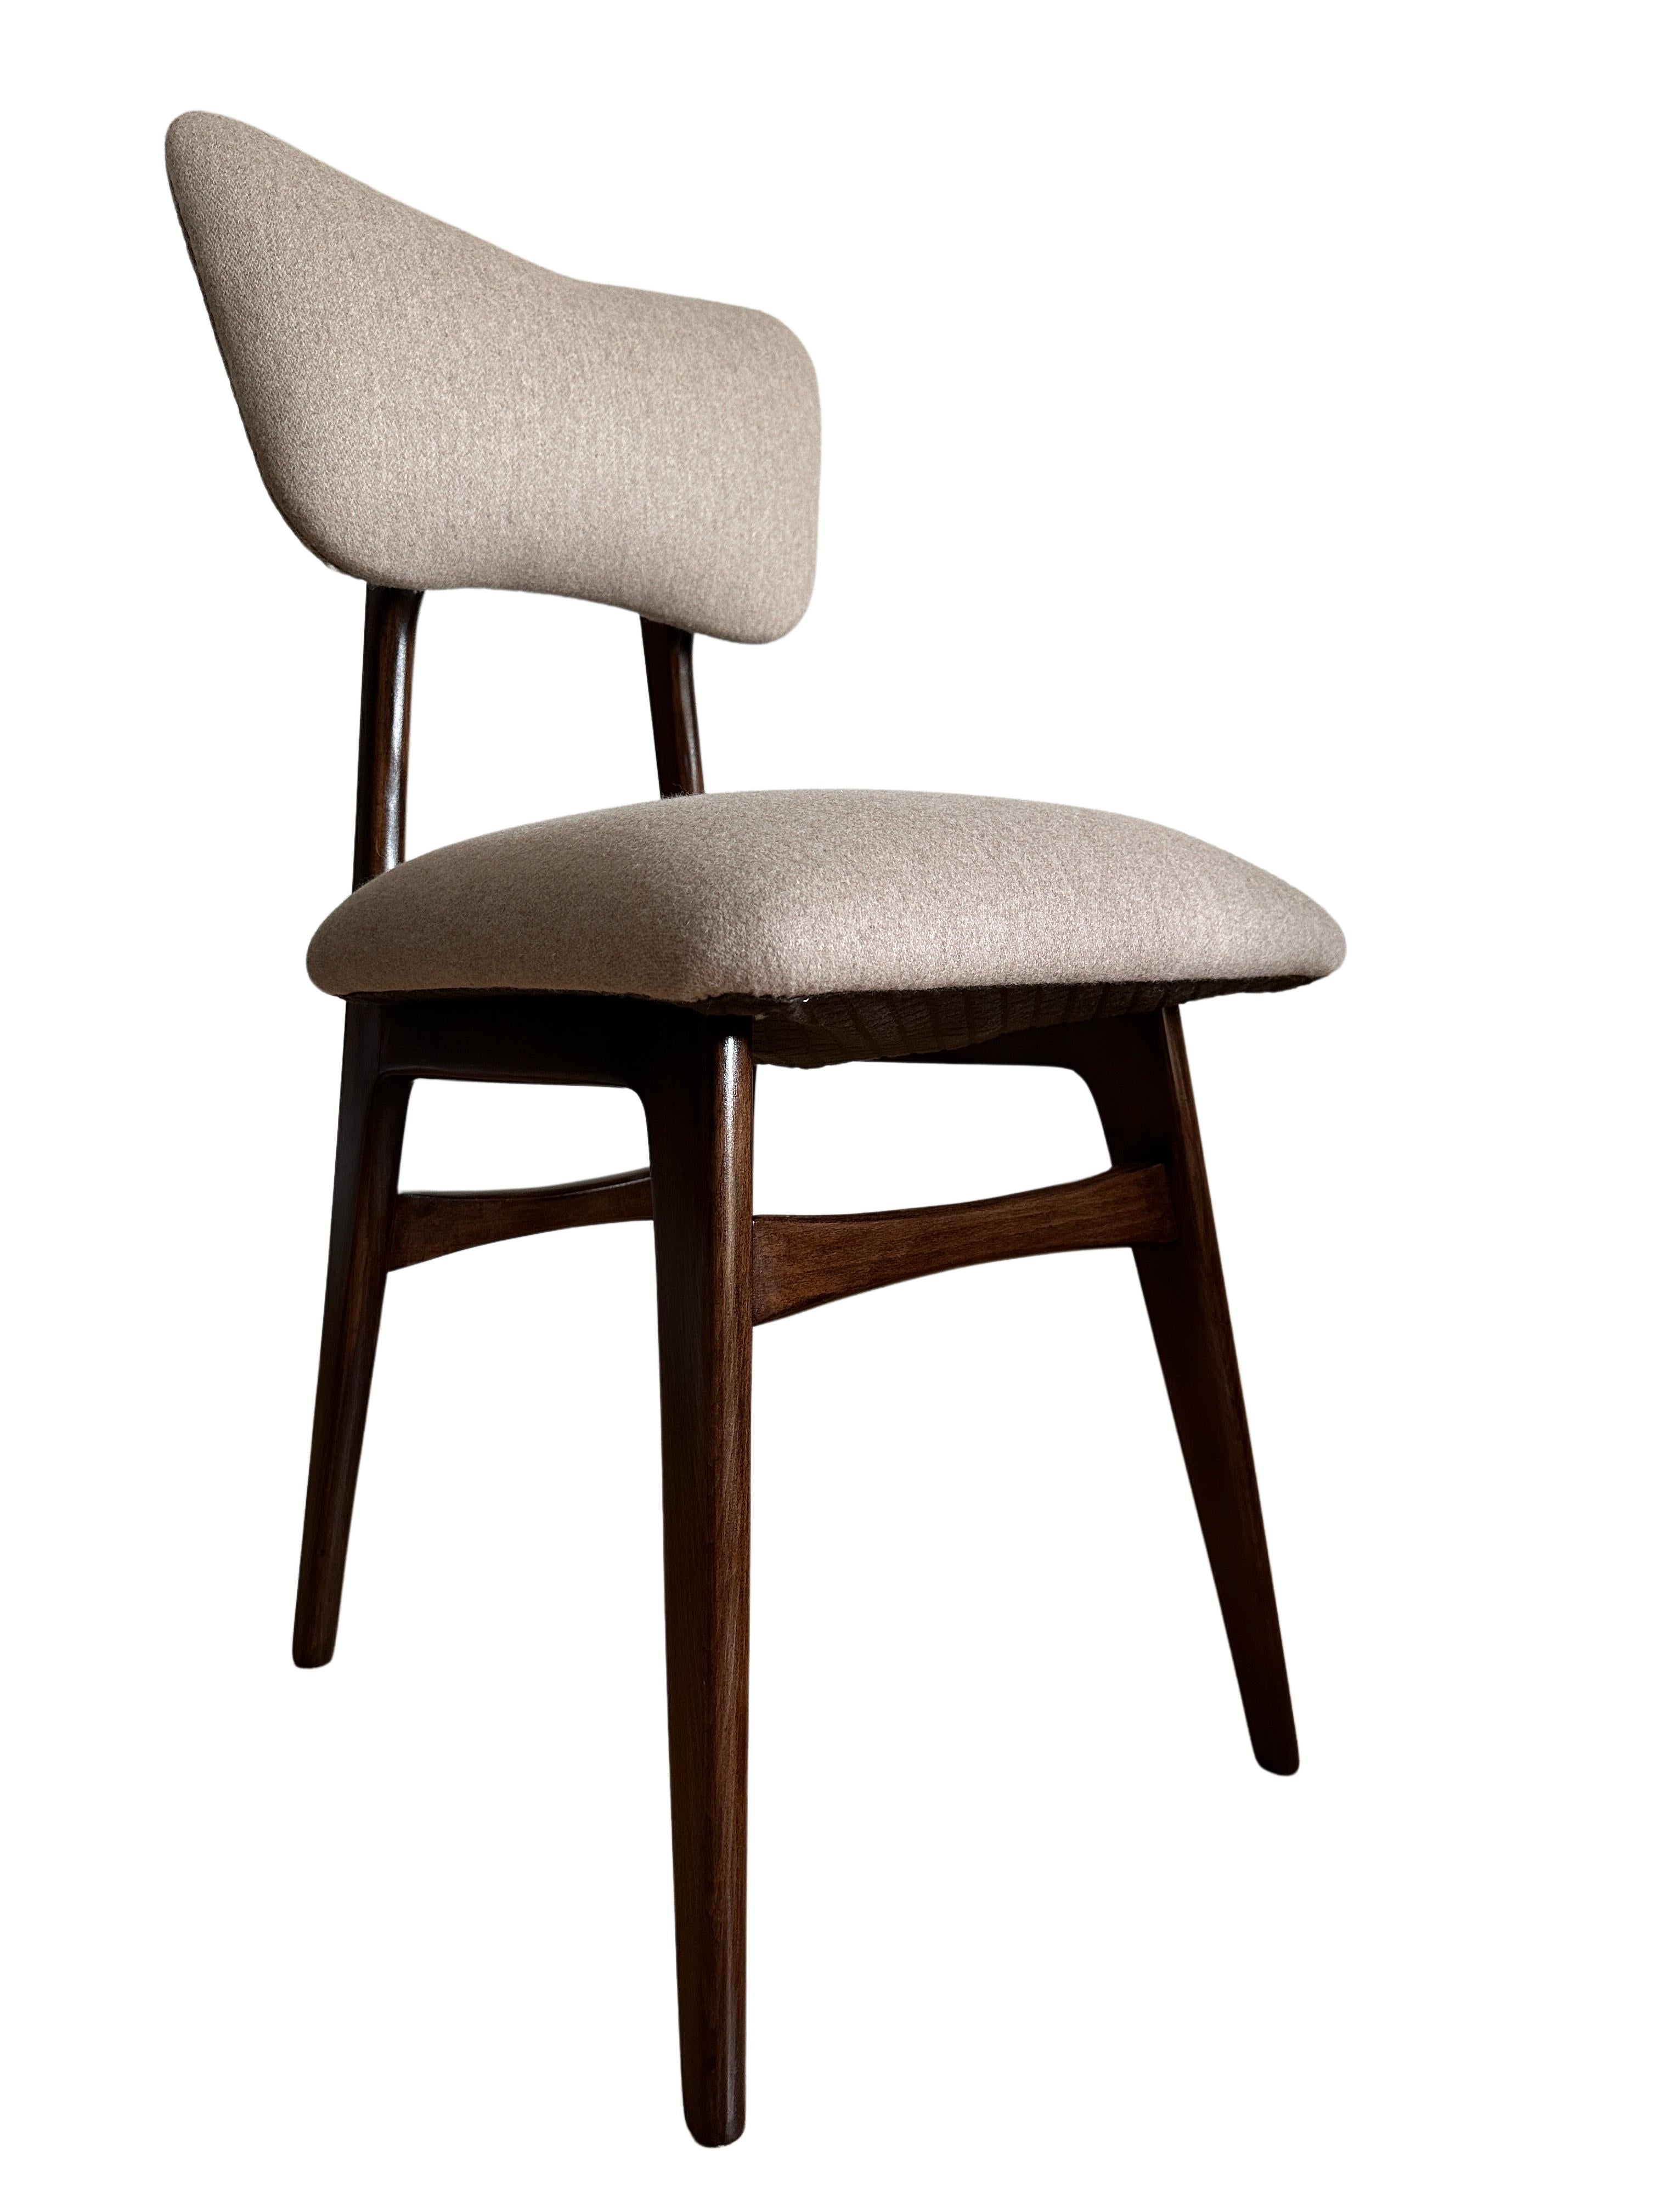 Unique set of six chairs manufactured in Poland in the 1960s, designed by Rajmund Halas. 

The upholstery is made of premium wool fabric, nice and soft to the touch. 
A noble, thick woollen fabric recommended for upholstery, but also suitable for